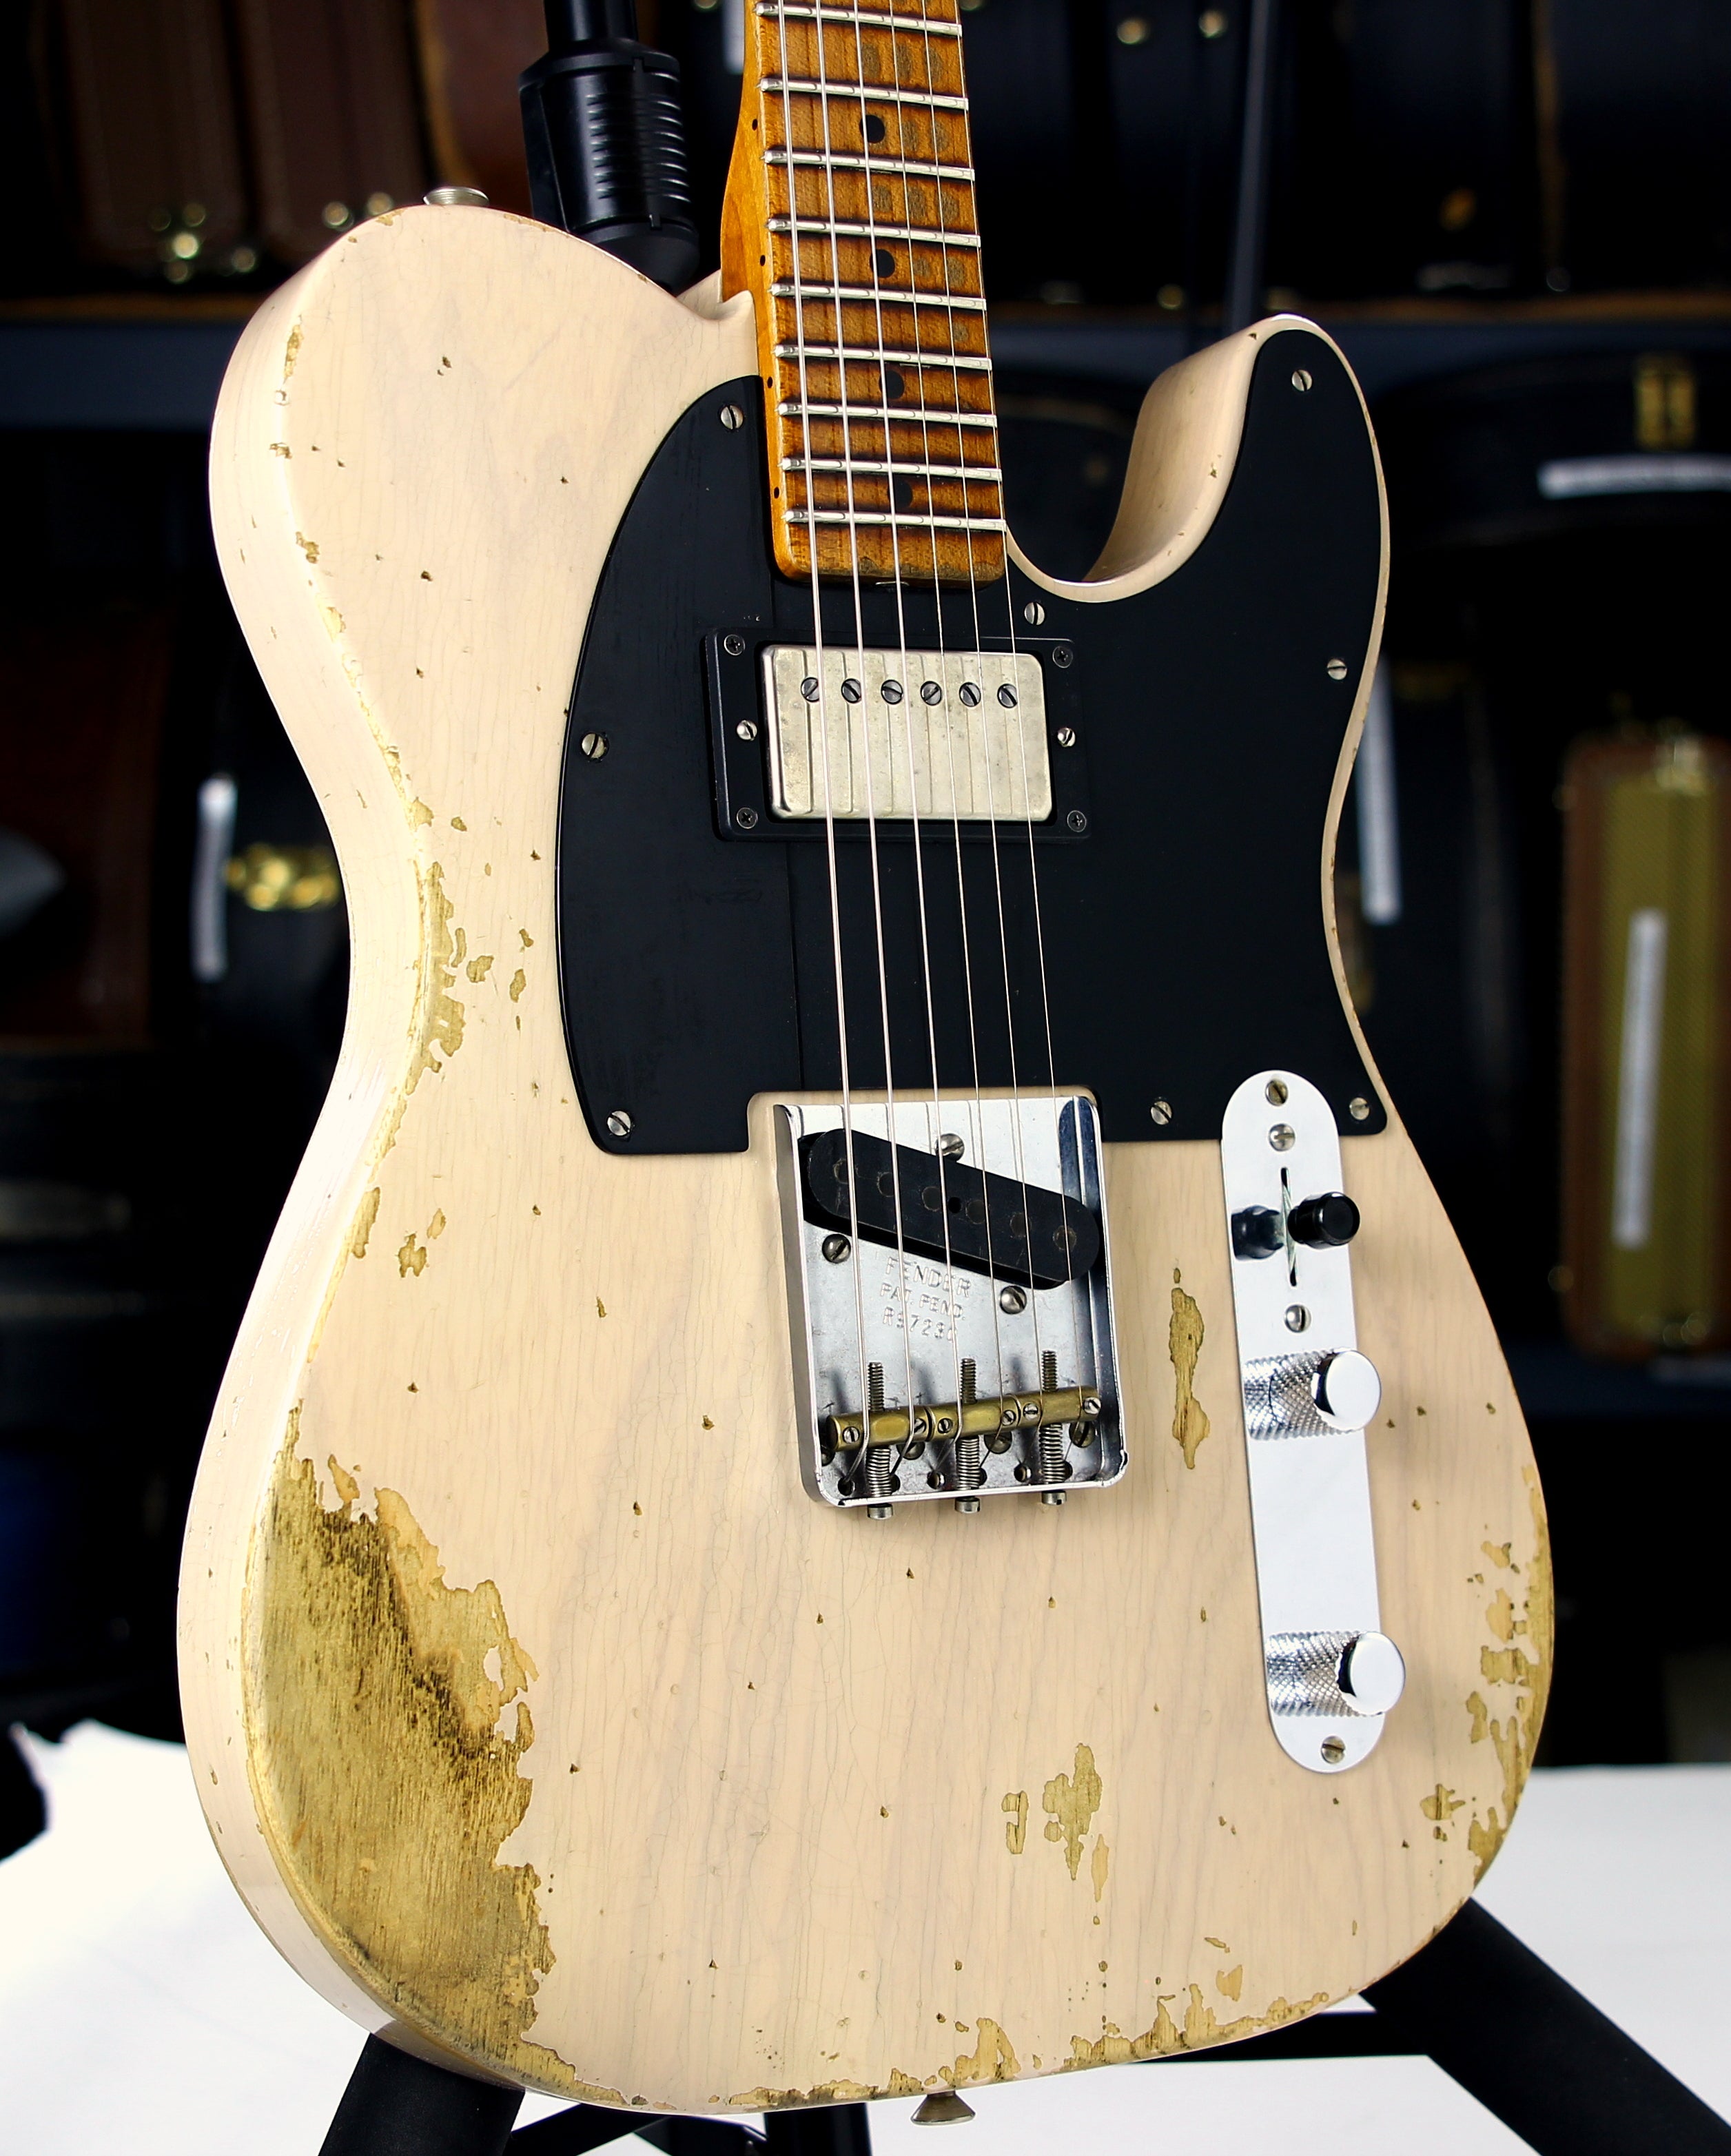 *SOLD*  2019 Fender Custom Shop Limited Edition 1951 Nocaster '51 Telecaster HS Tele - Heavy Relic Dirty White Blonde, Ash Body, NAMM